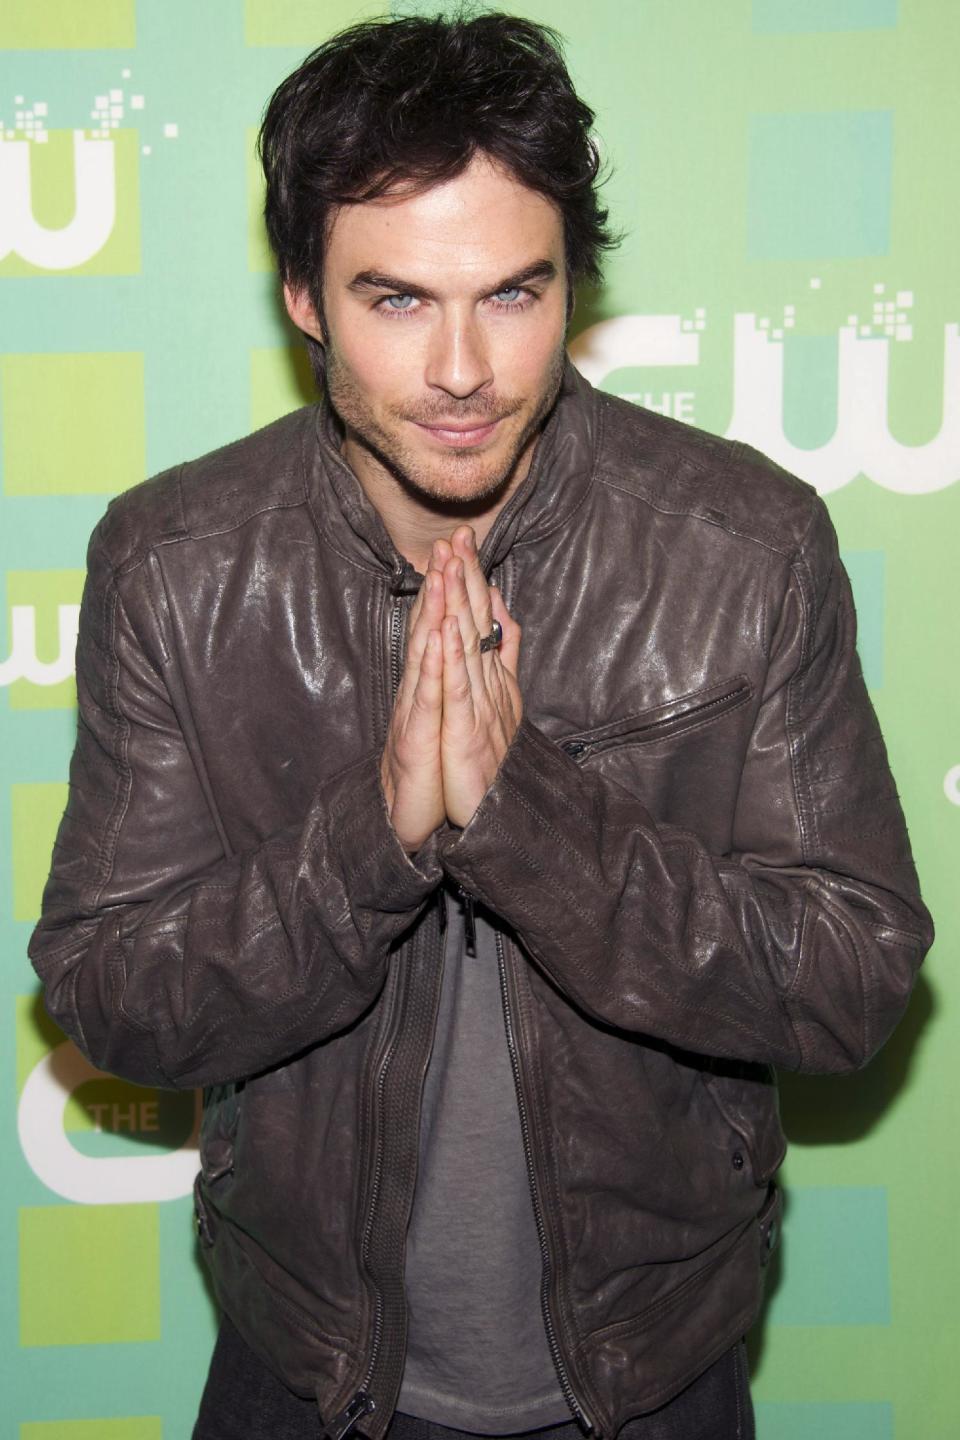 Ian Somerhalder attends The CW Television Network's Upfront 2012 in New York, Thursday, May 17, 2012. (AP Photo/Charles Sykes)